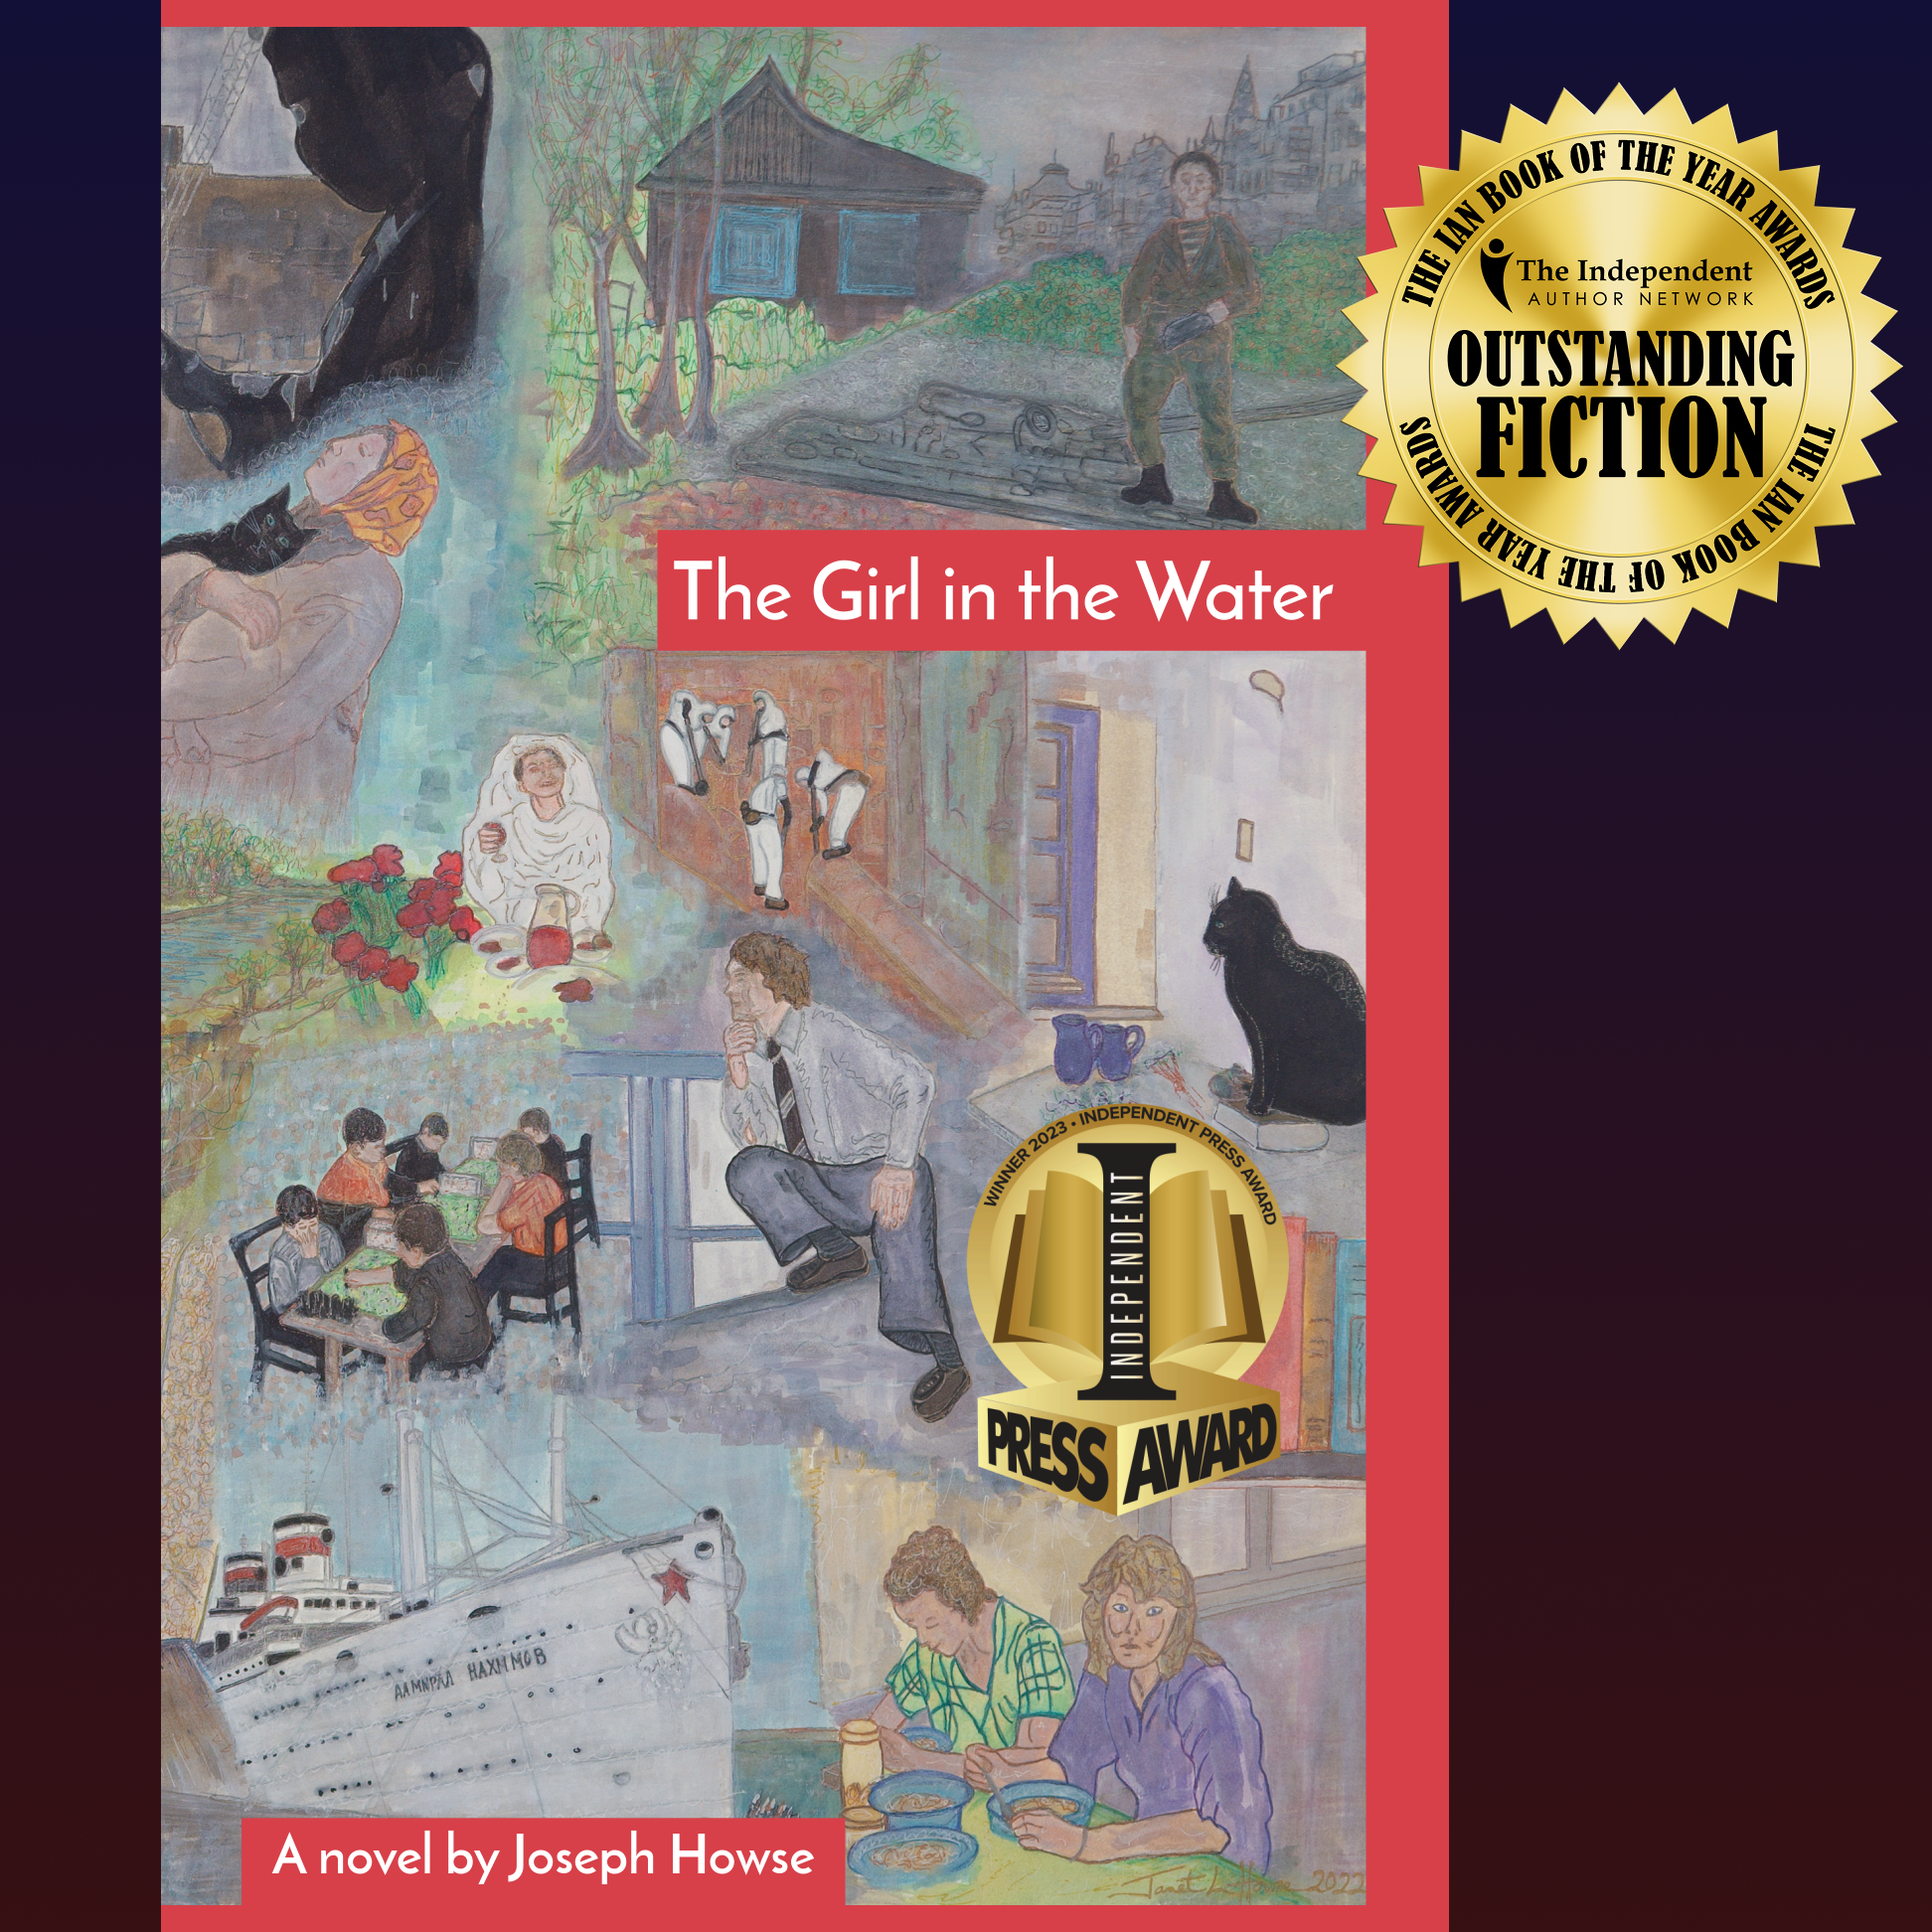 Book cover of The Girl in the Water, a novel by Joseph Howse, with its badge as an IAN Awards Outstanding Fiction category winner